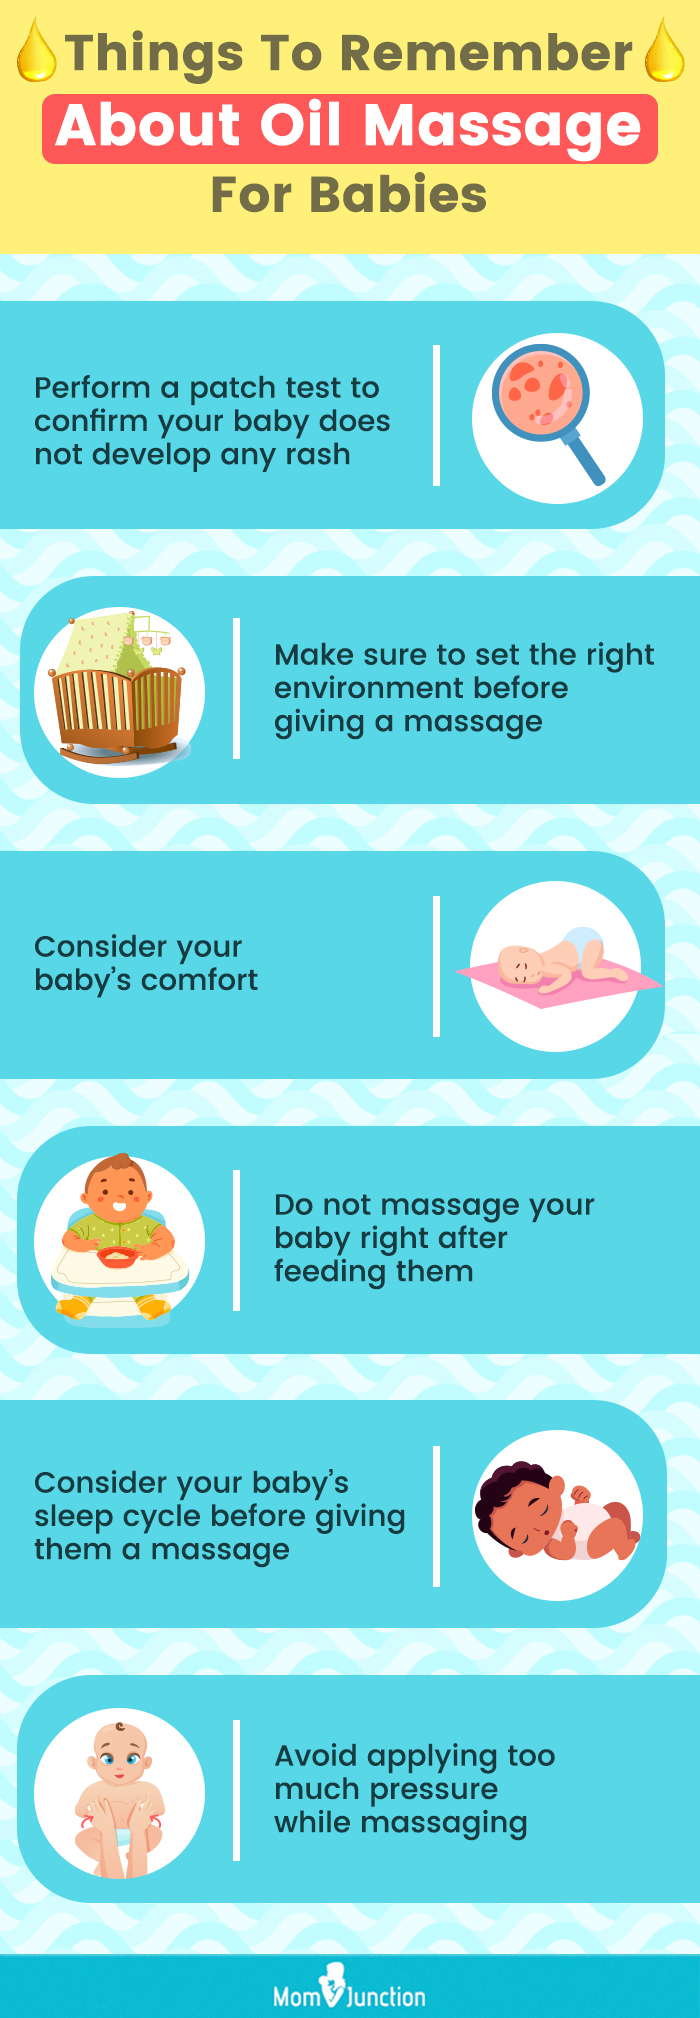 things to remember about oil massage for babies (infographic)